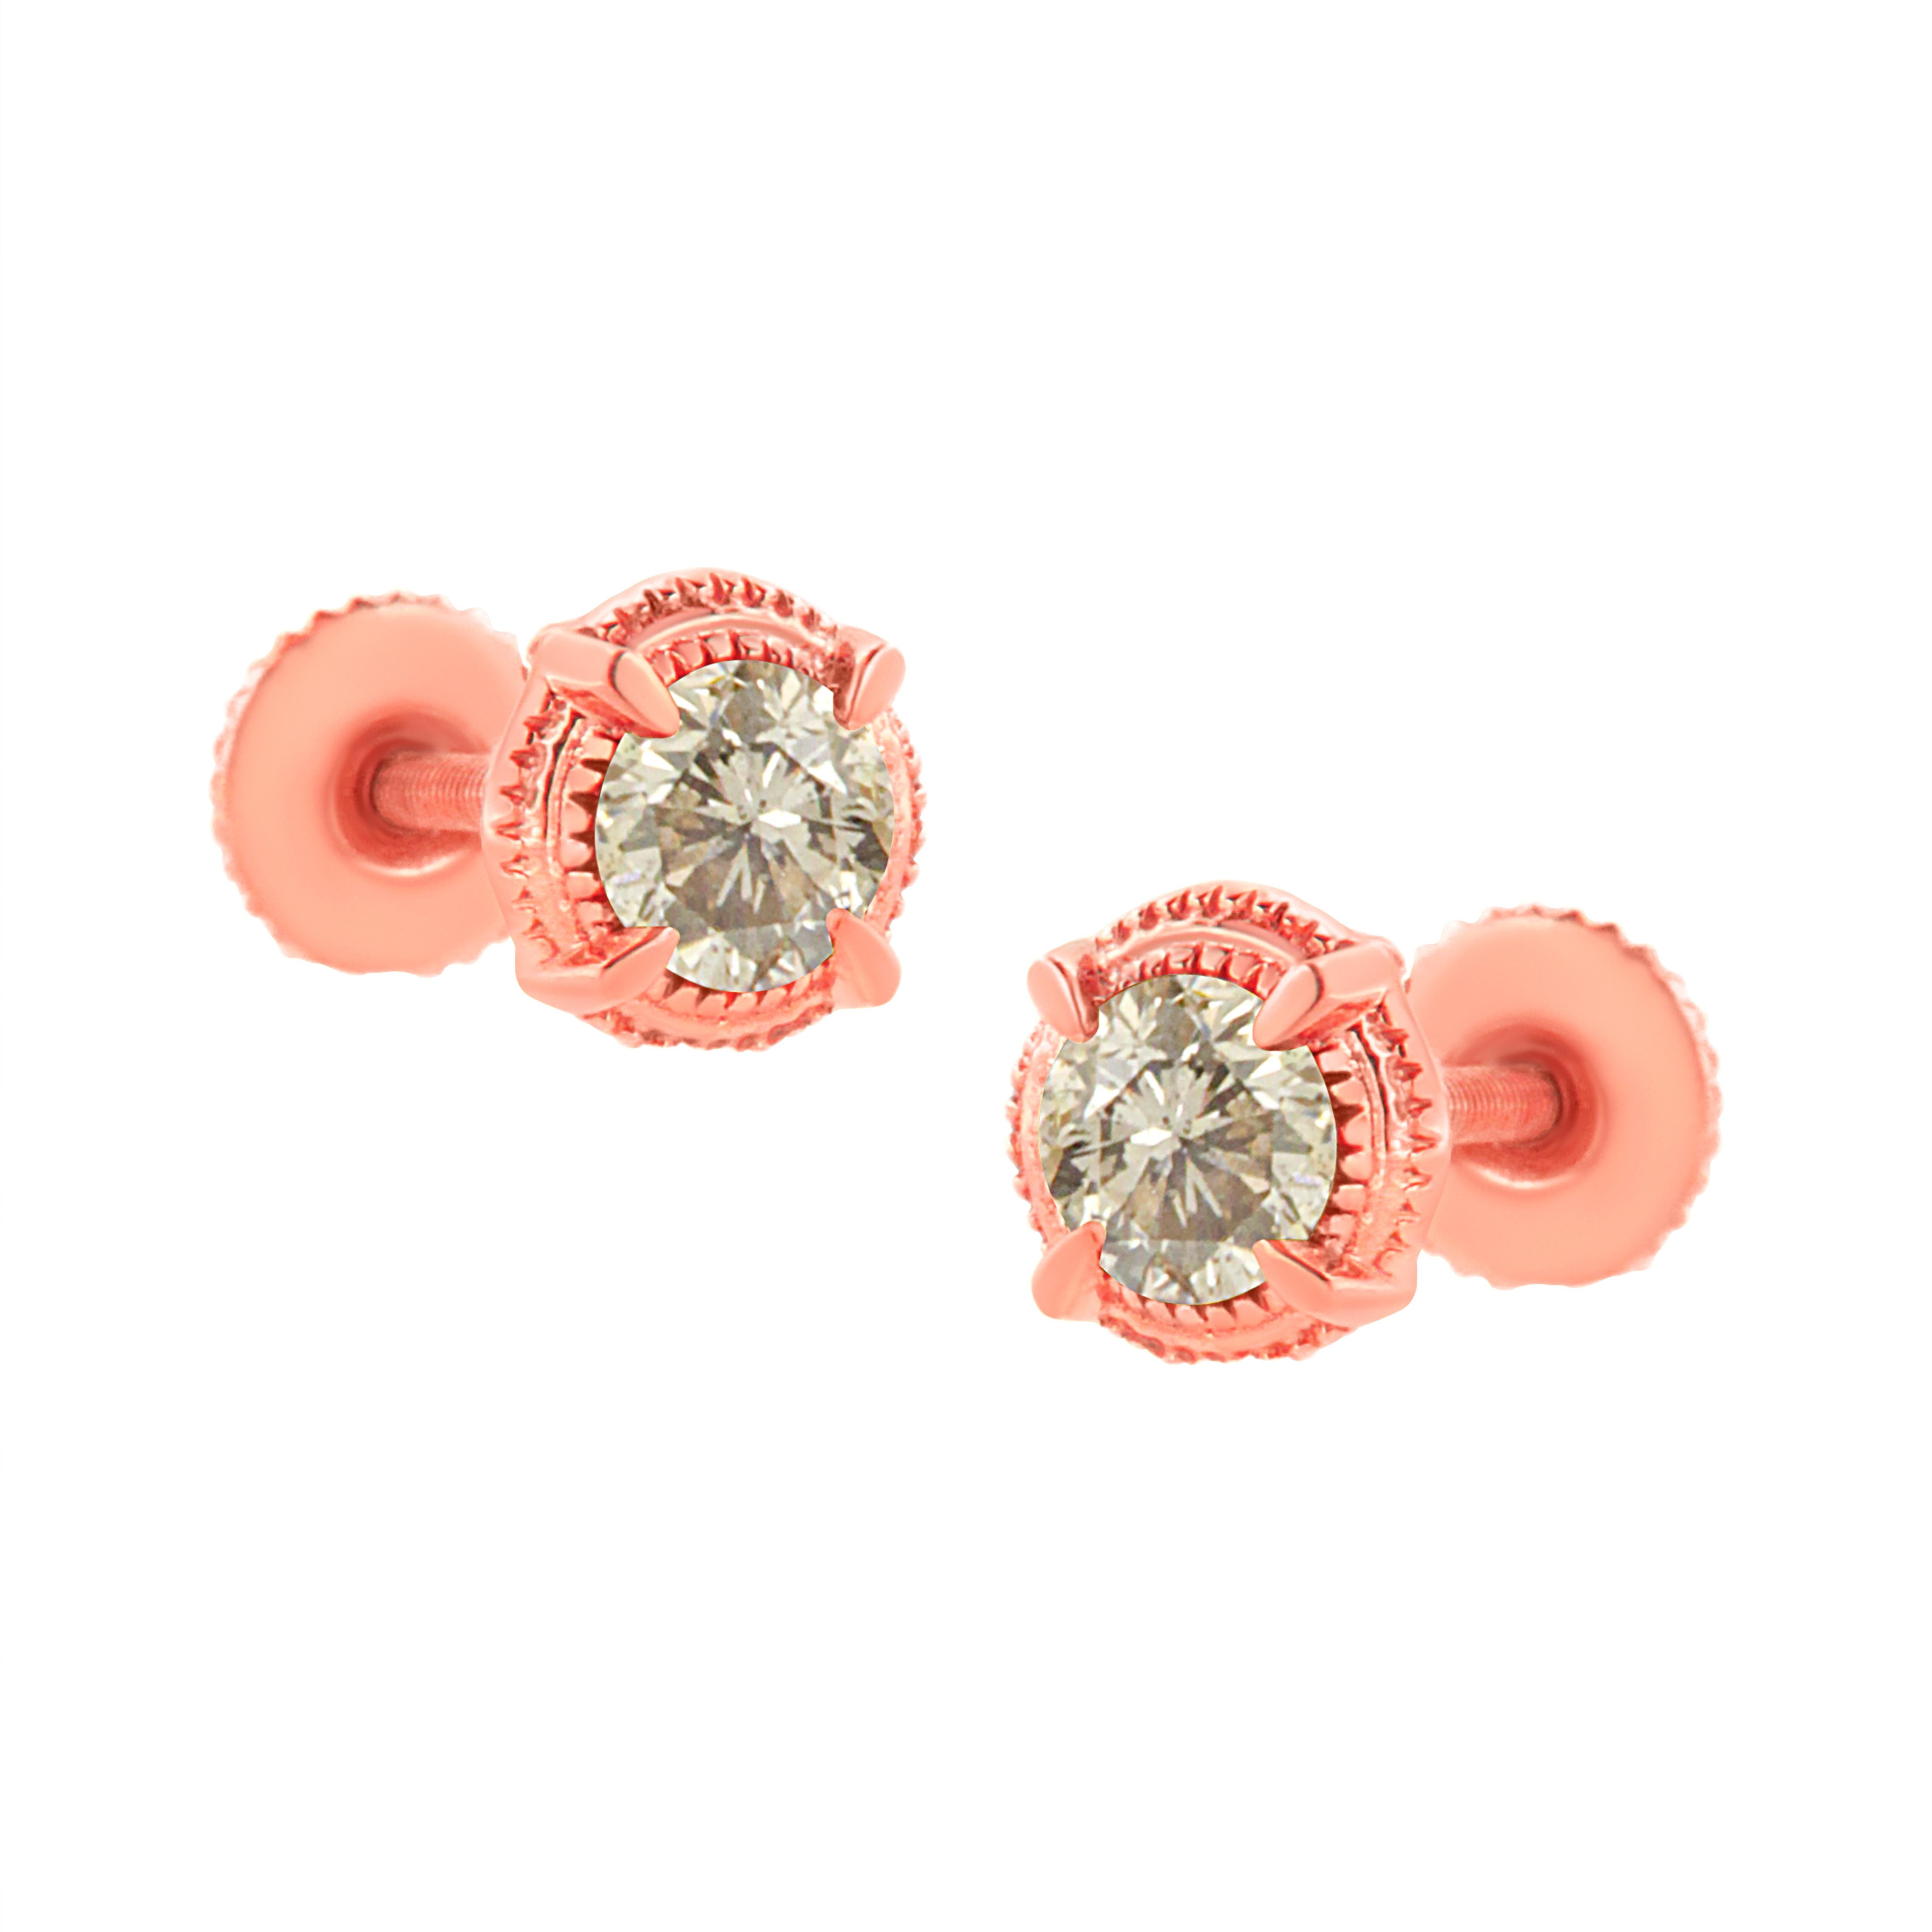 Contemporary Rose Gold Plated Sterling Silver 1.0 Carat Diamond Milgrain Stud Earrings For Sale